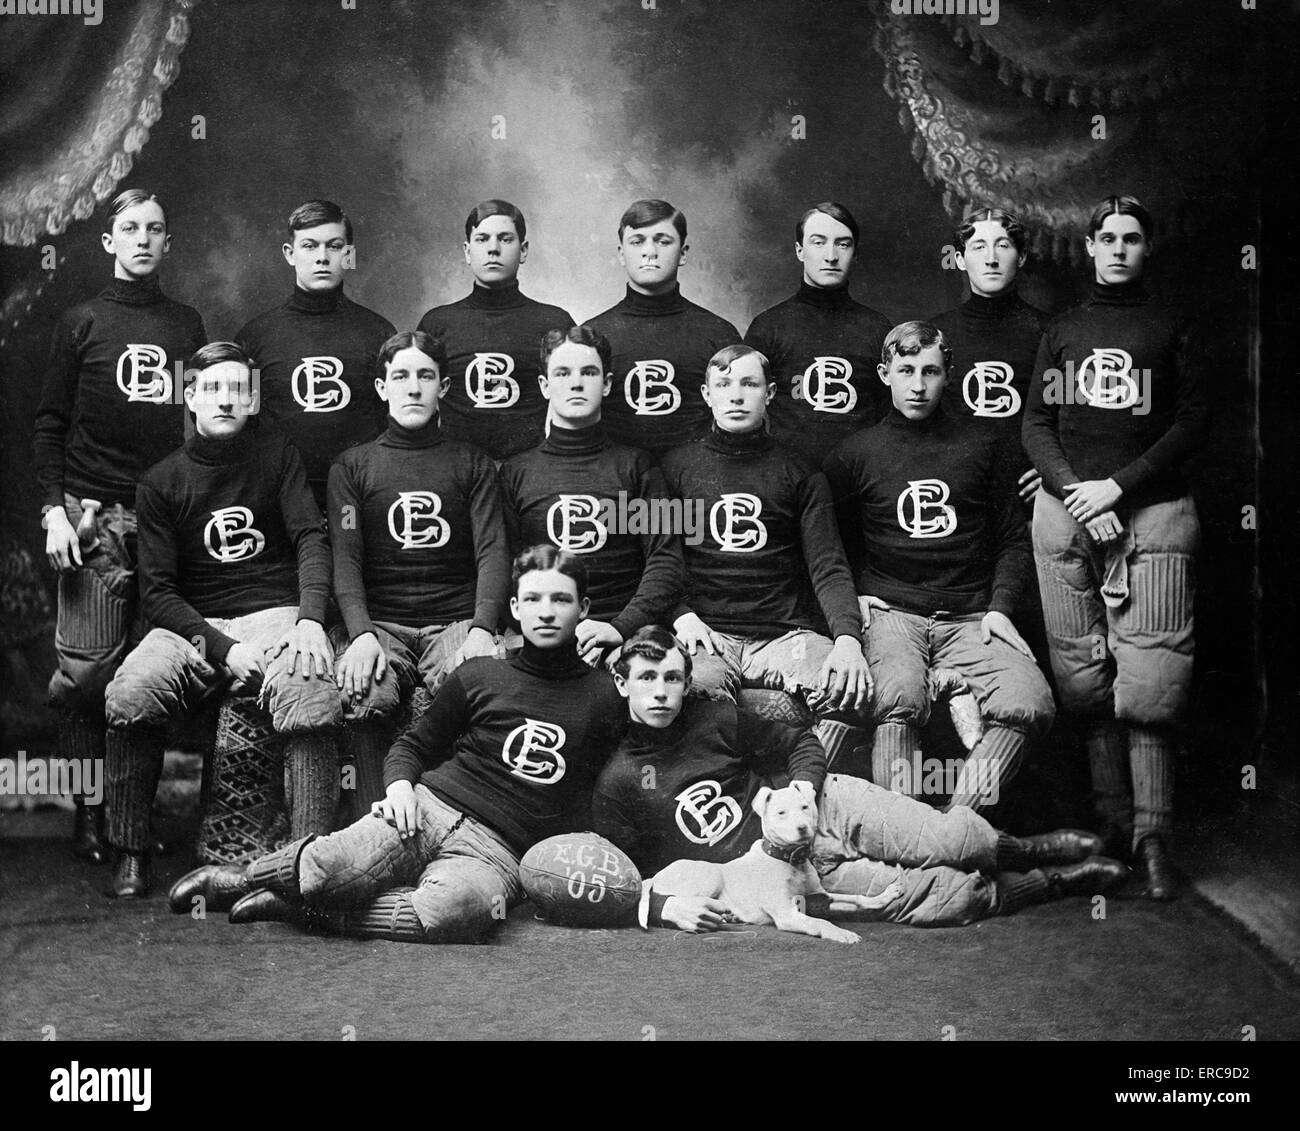 1900s 1905 TURN OF THE CENTURY FOOTBALL TEAM PORTRAIT WITH CANINE MASCOT Stock Photo